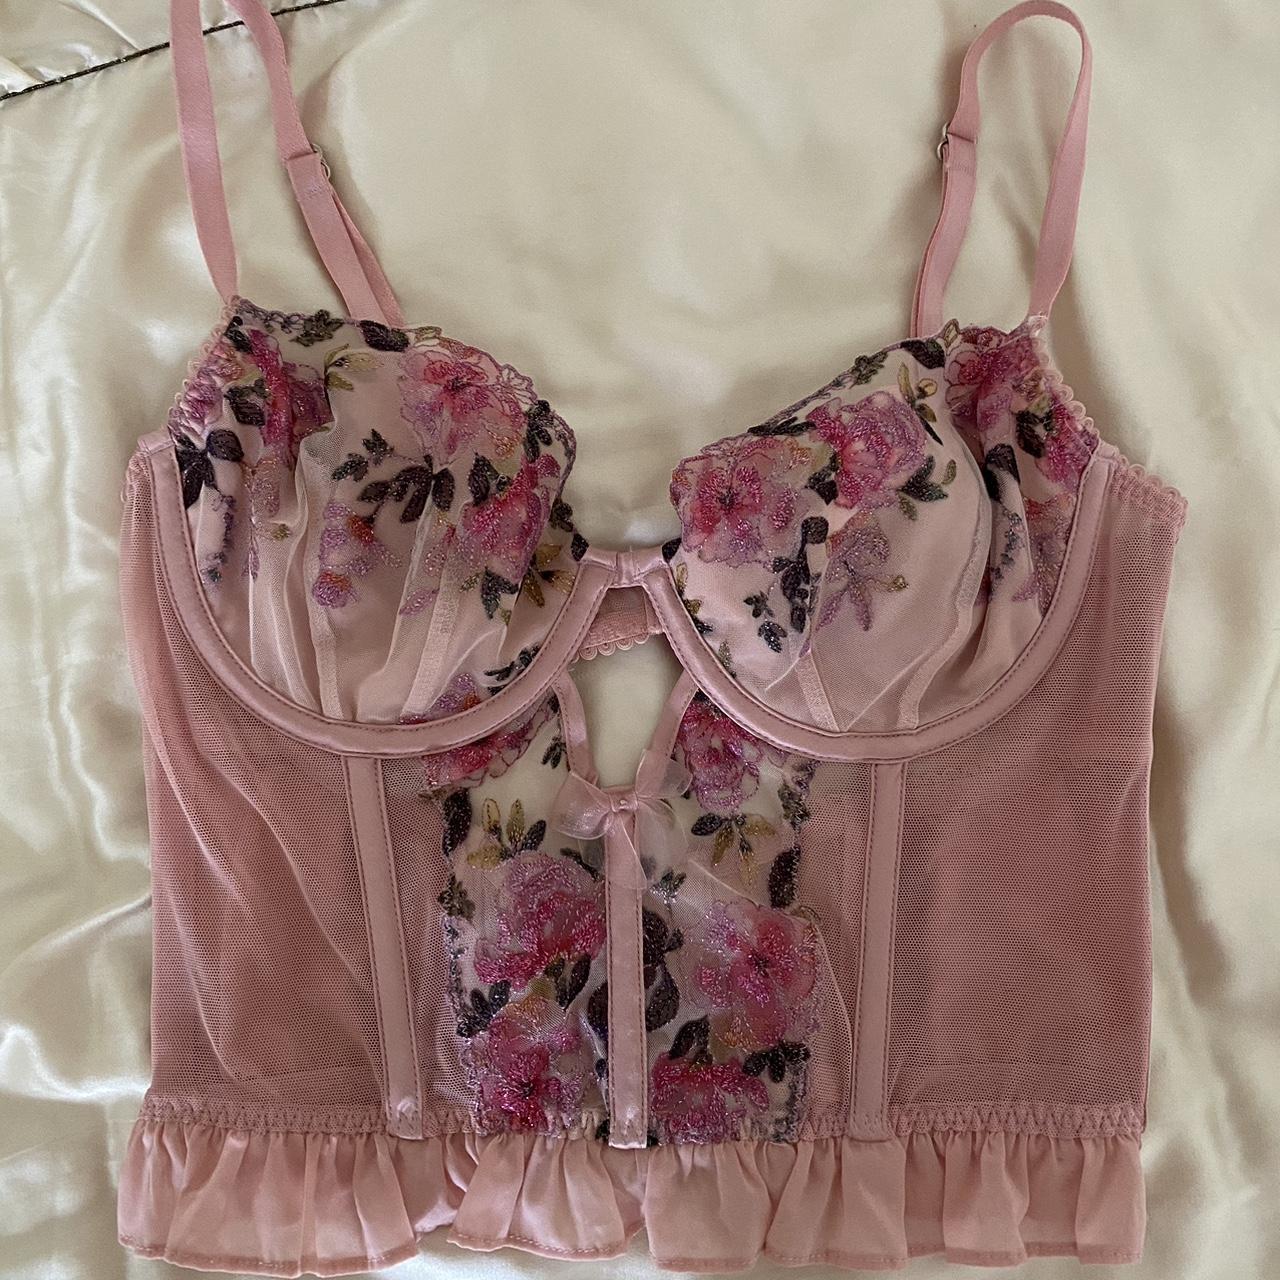 pink corset with lace brand - vaacodor size - - Depop